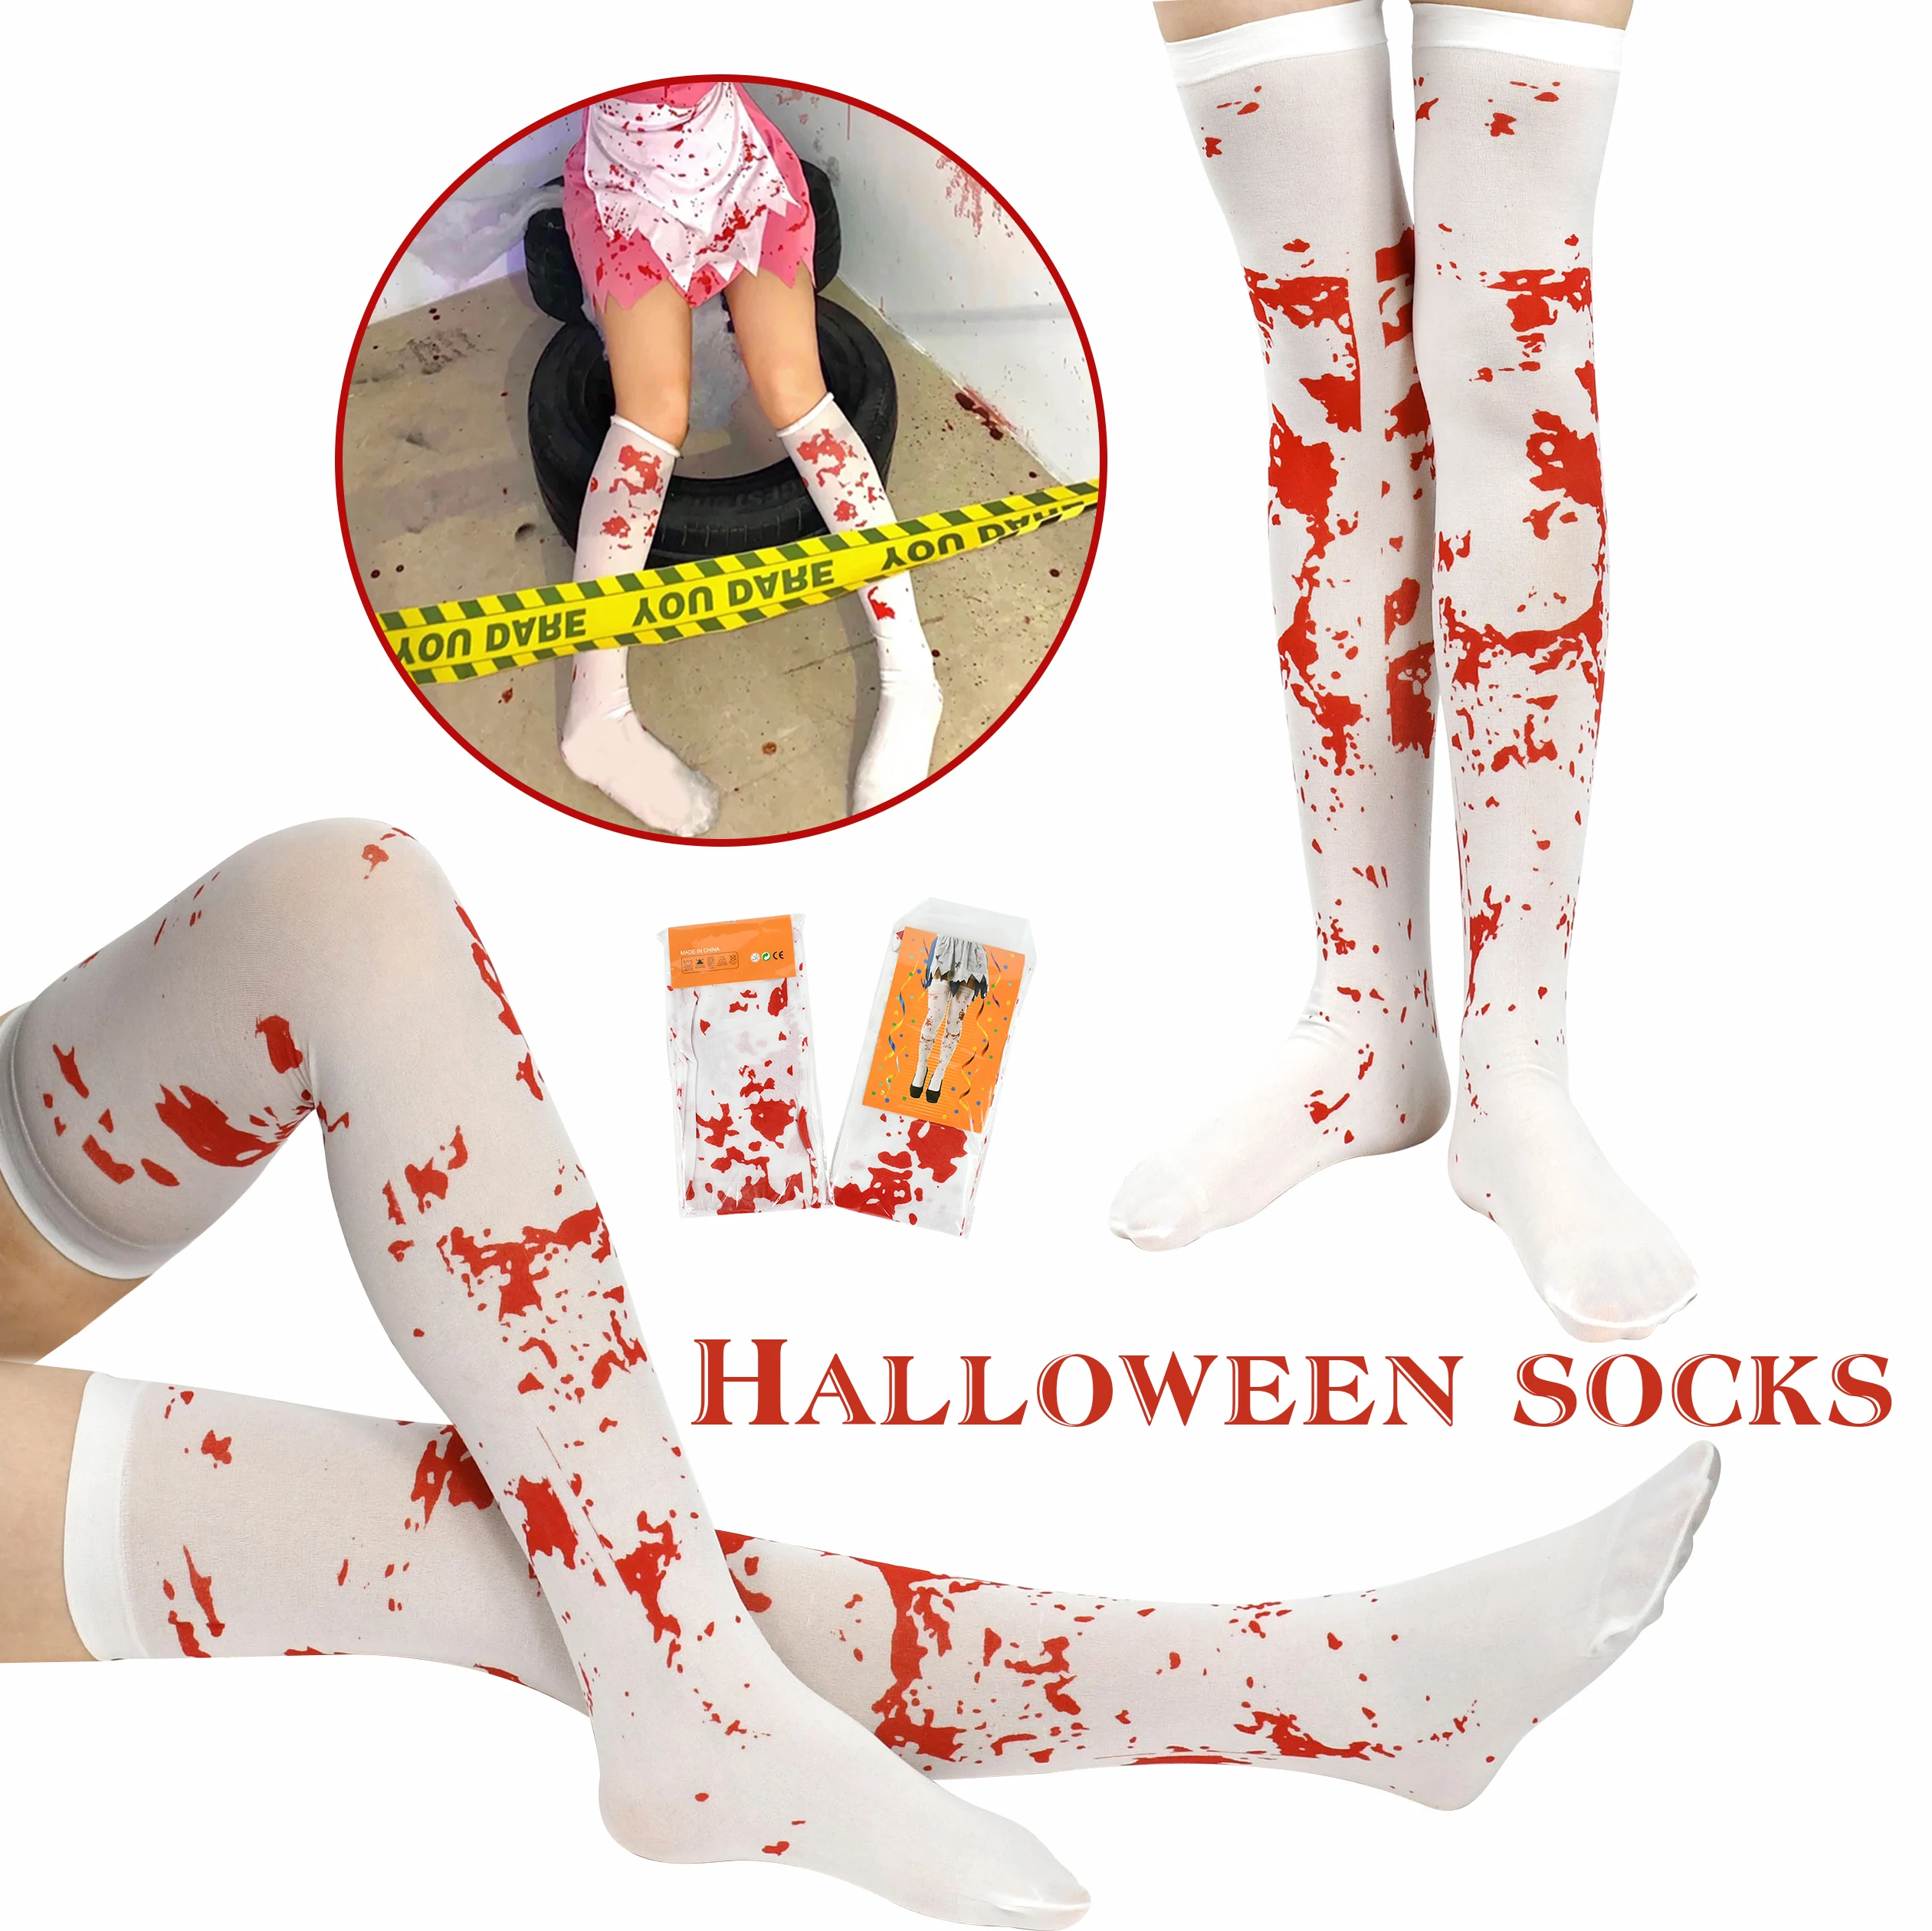 

1 Pair Halloween Socks Women Over The Knee Terror Blood Stained Bloody Socks Masquerade Clothing Halloween Party Cosplay Costume